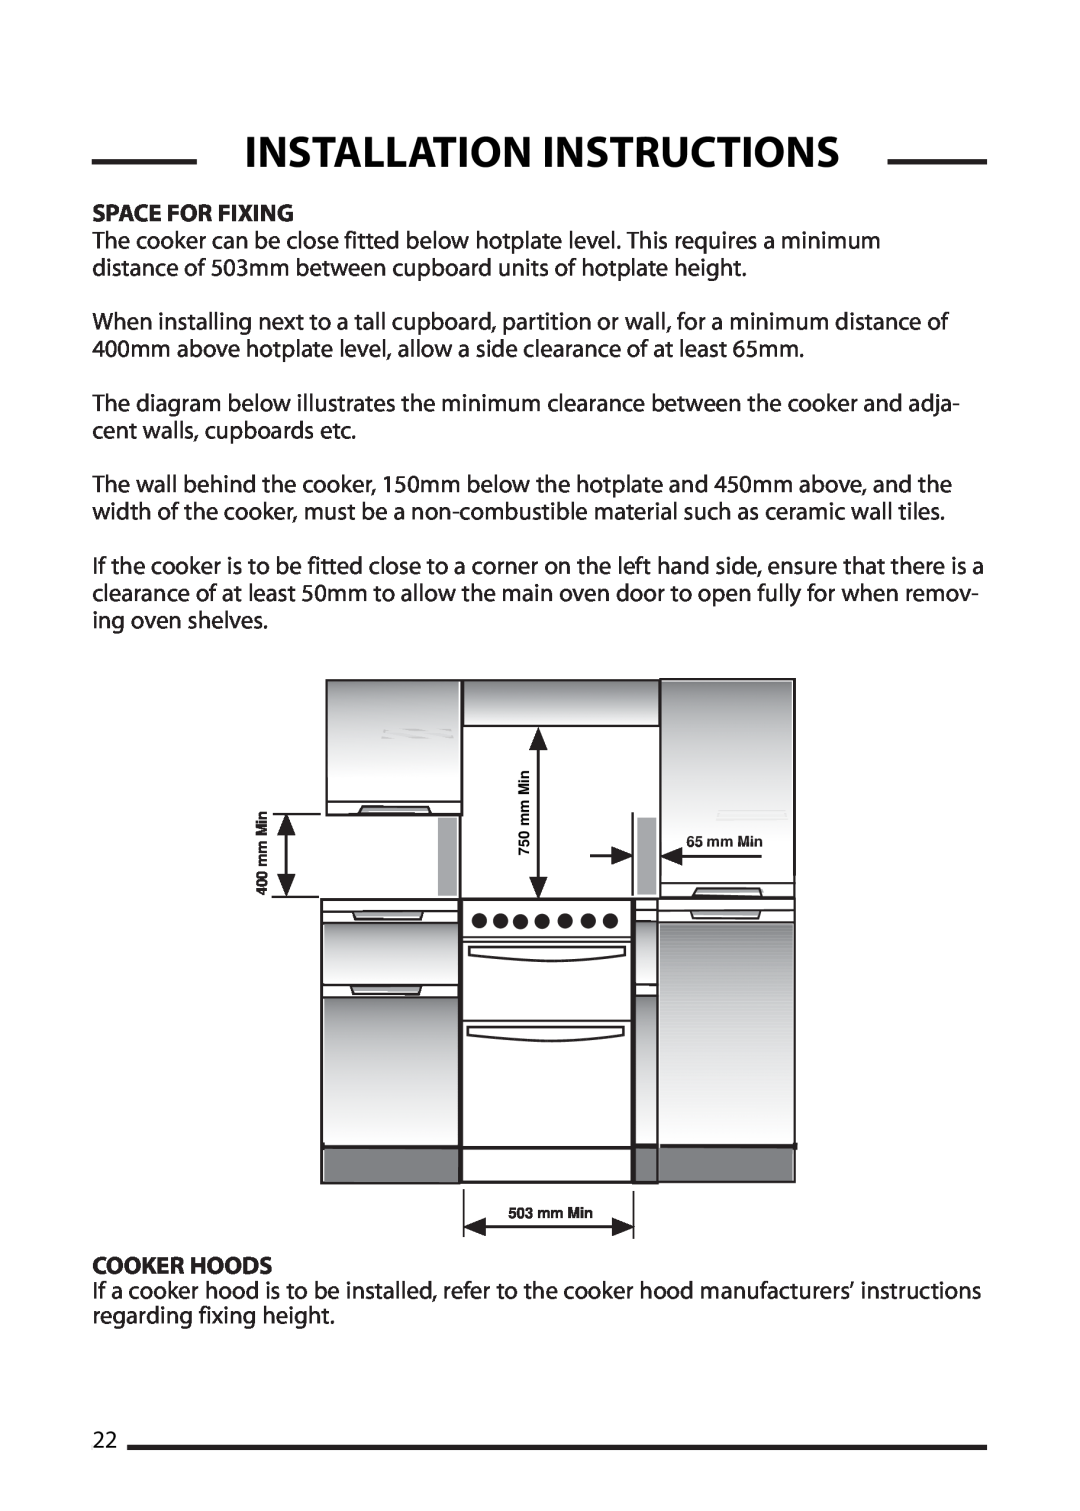 Cannon 10510G, 10512G, 10515G, 10518G installation instructions Space For Fixing, Cooker Hoods, Installation Instructions 